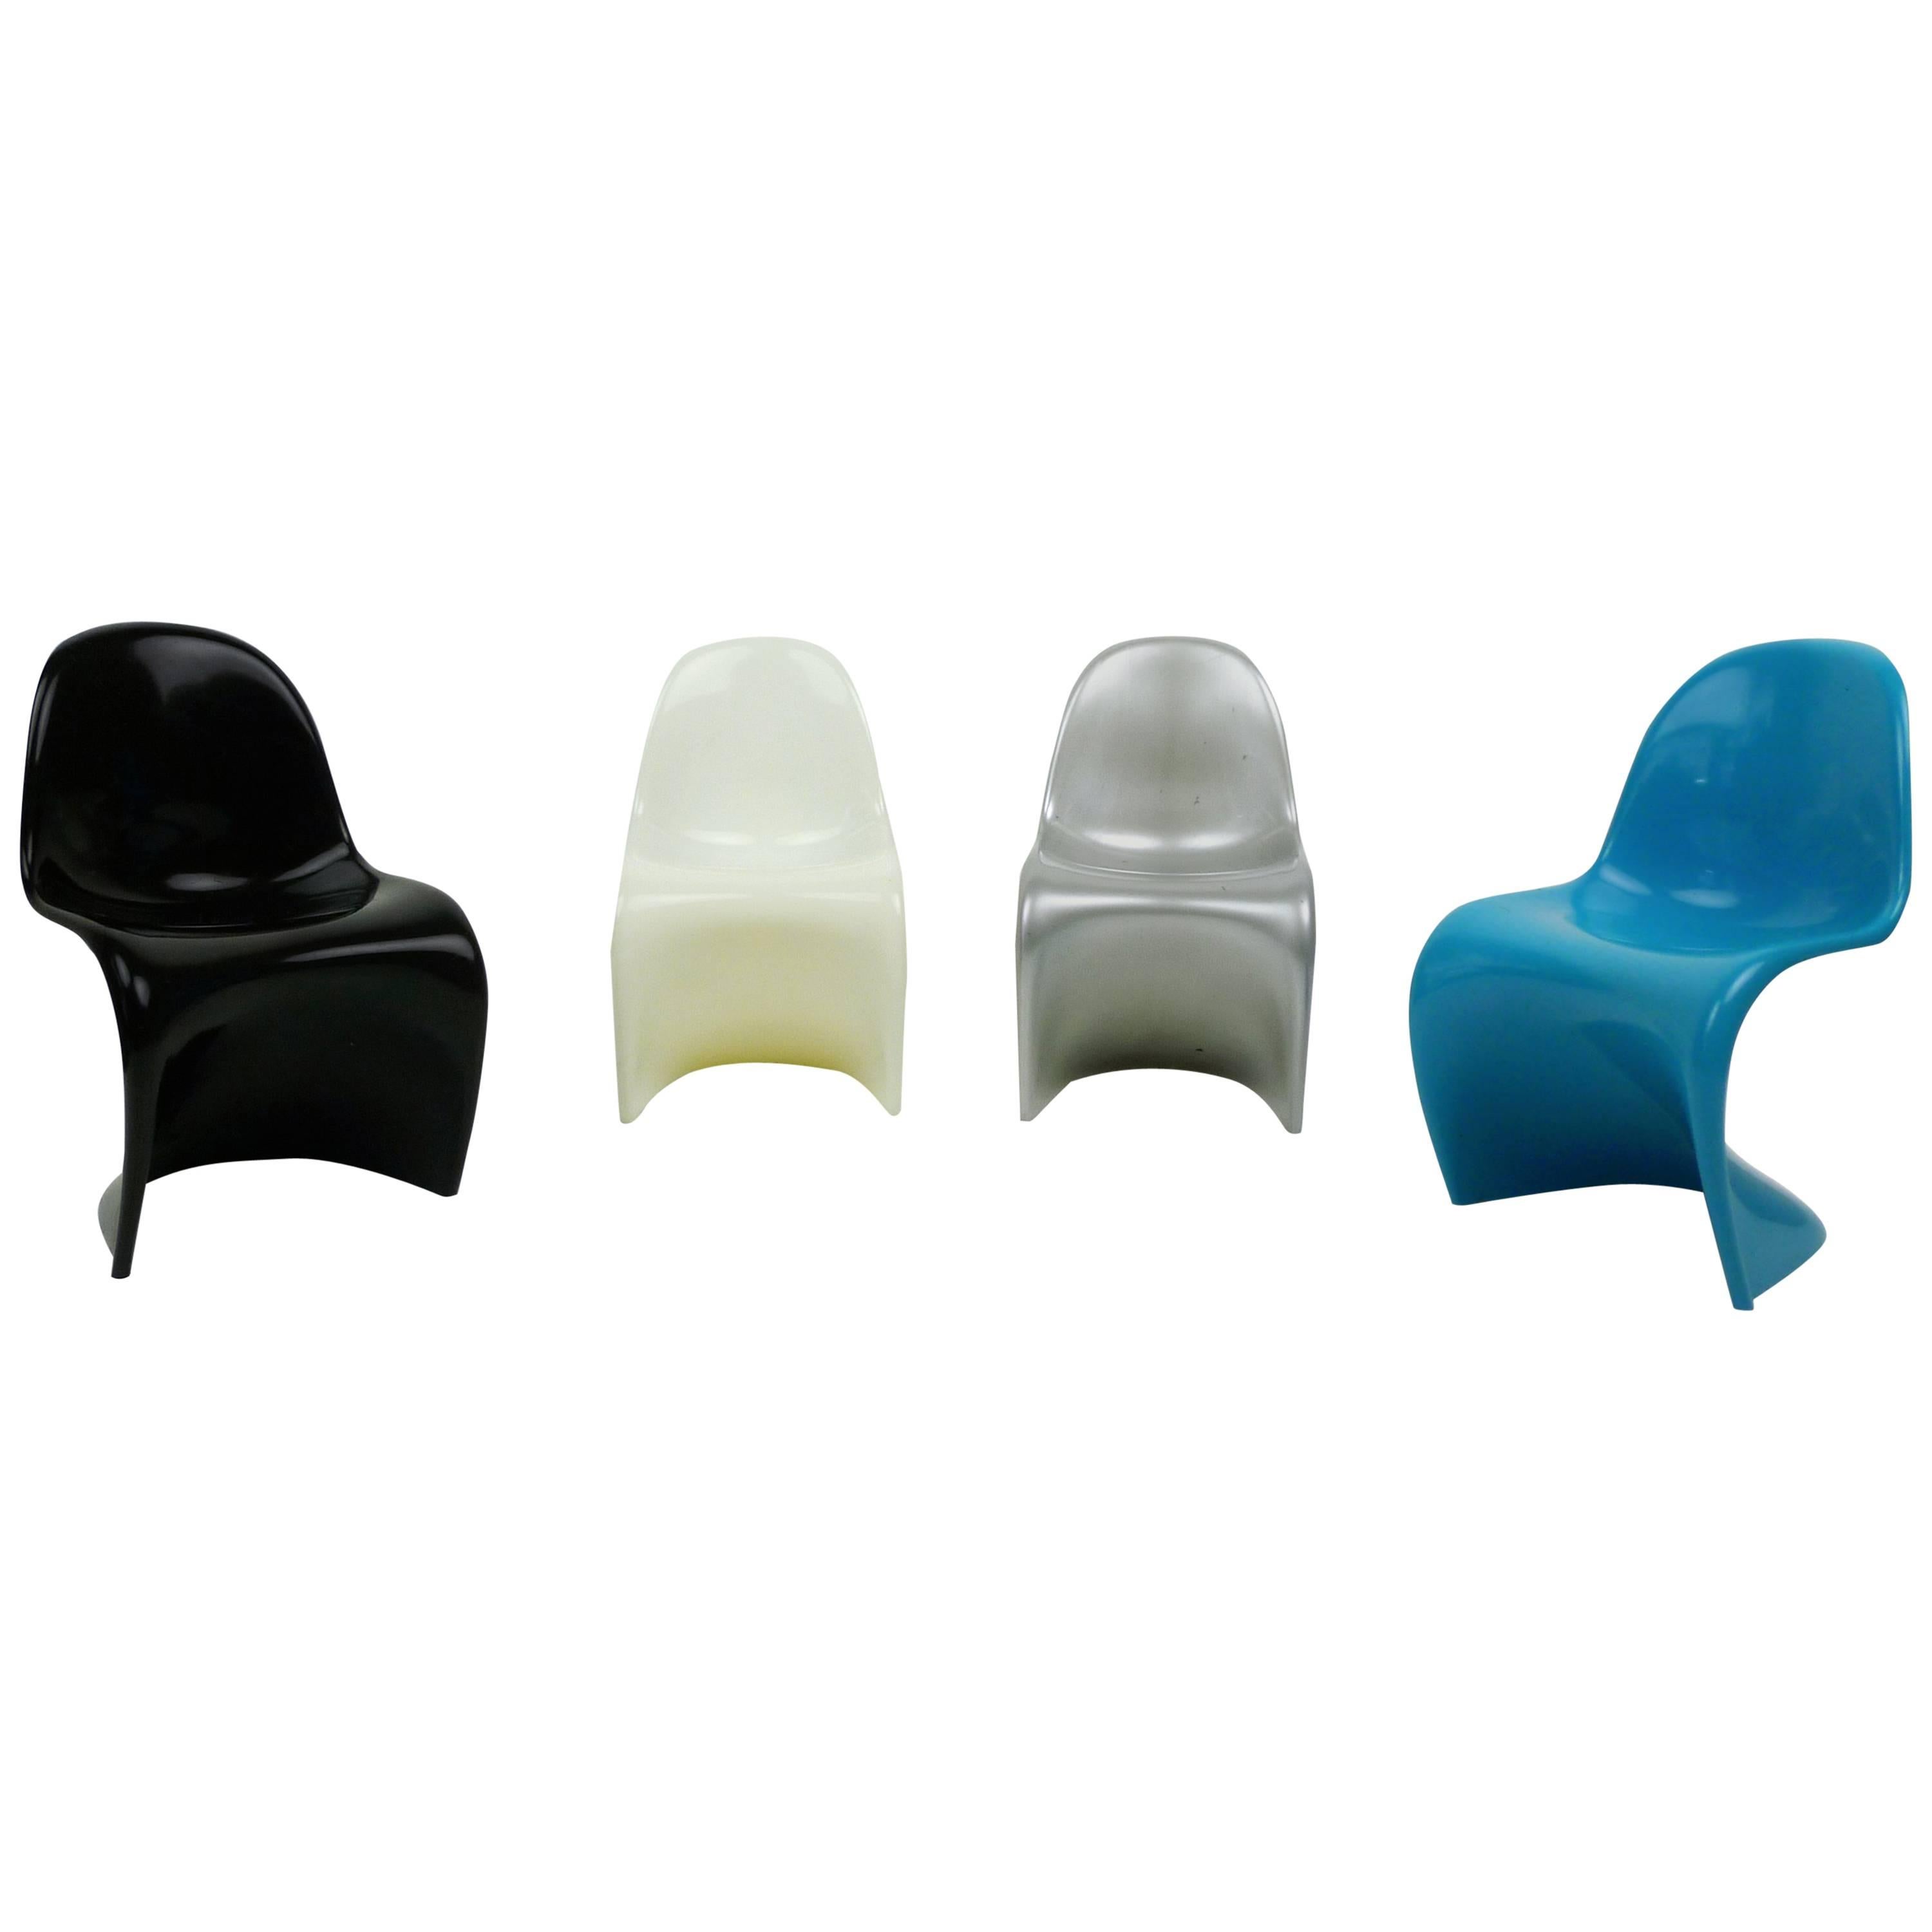 Set of Four Miniature Panton Chairs from Germany, 1970s For Sale